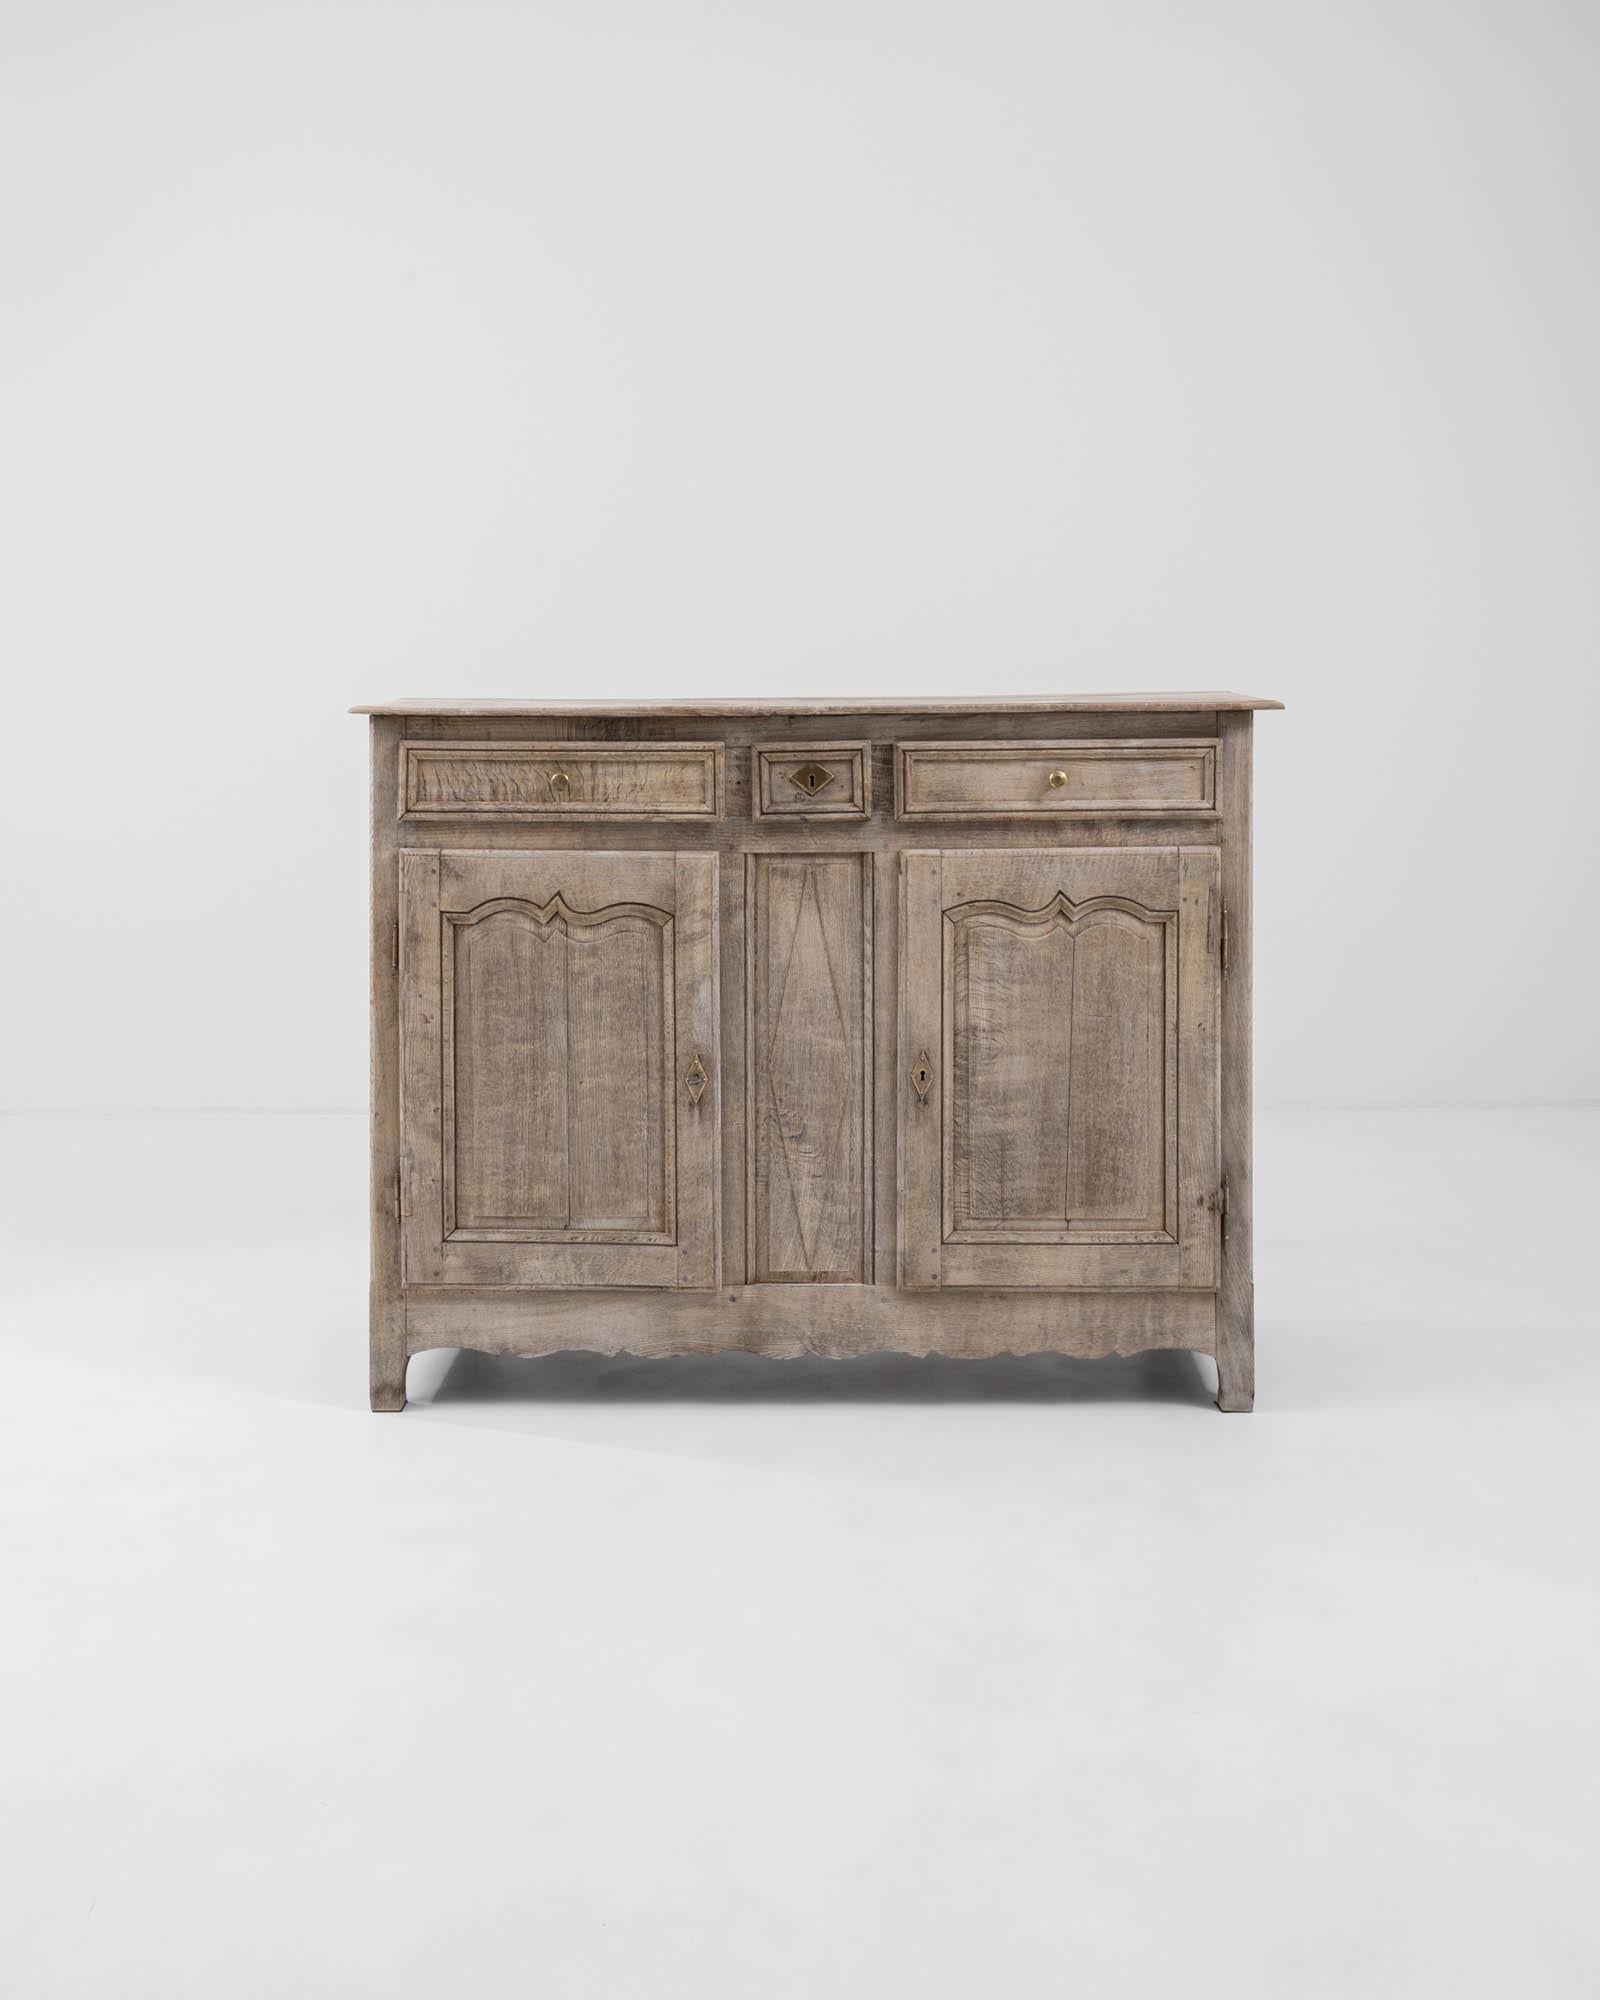 A wooden buffet created in 19th century France. Bright, ornate, and beautifully constructed, this distinguished buffet greats one with a refreshing sense of calm. A careful bleaching process has been applied to the surface of the oak, which both